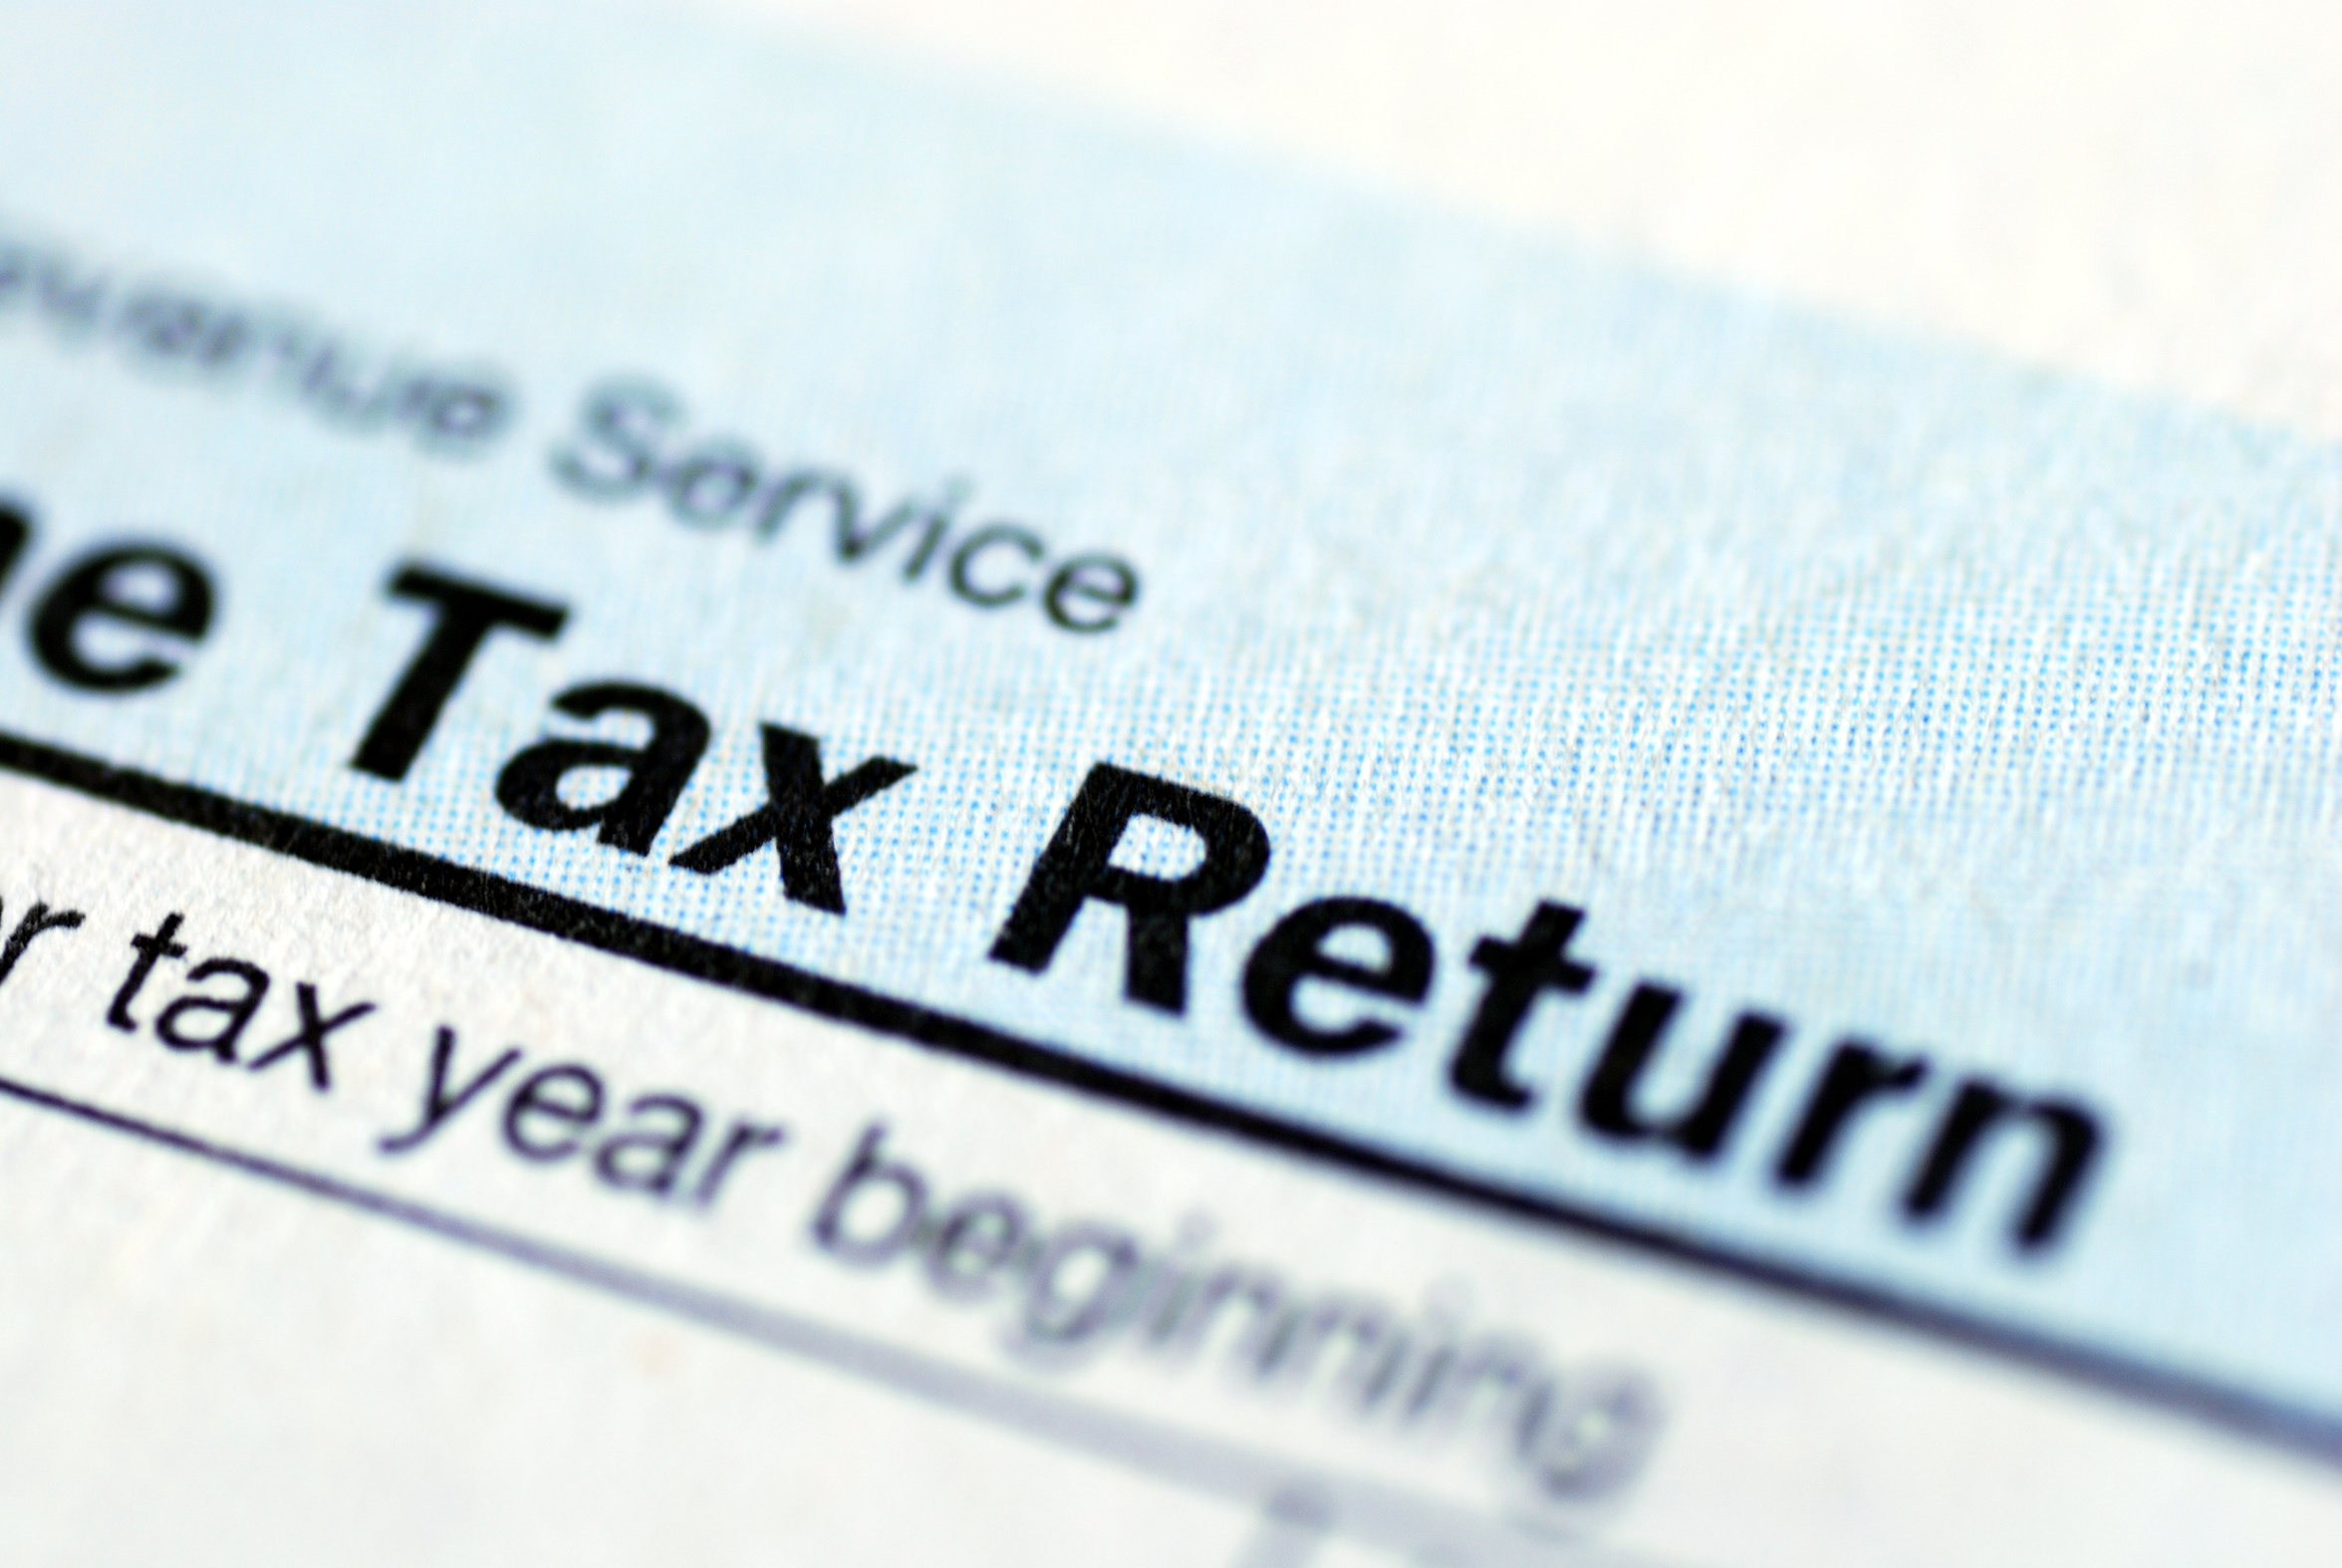 nris-can-file-their-tax-returns-in-india